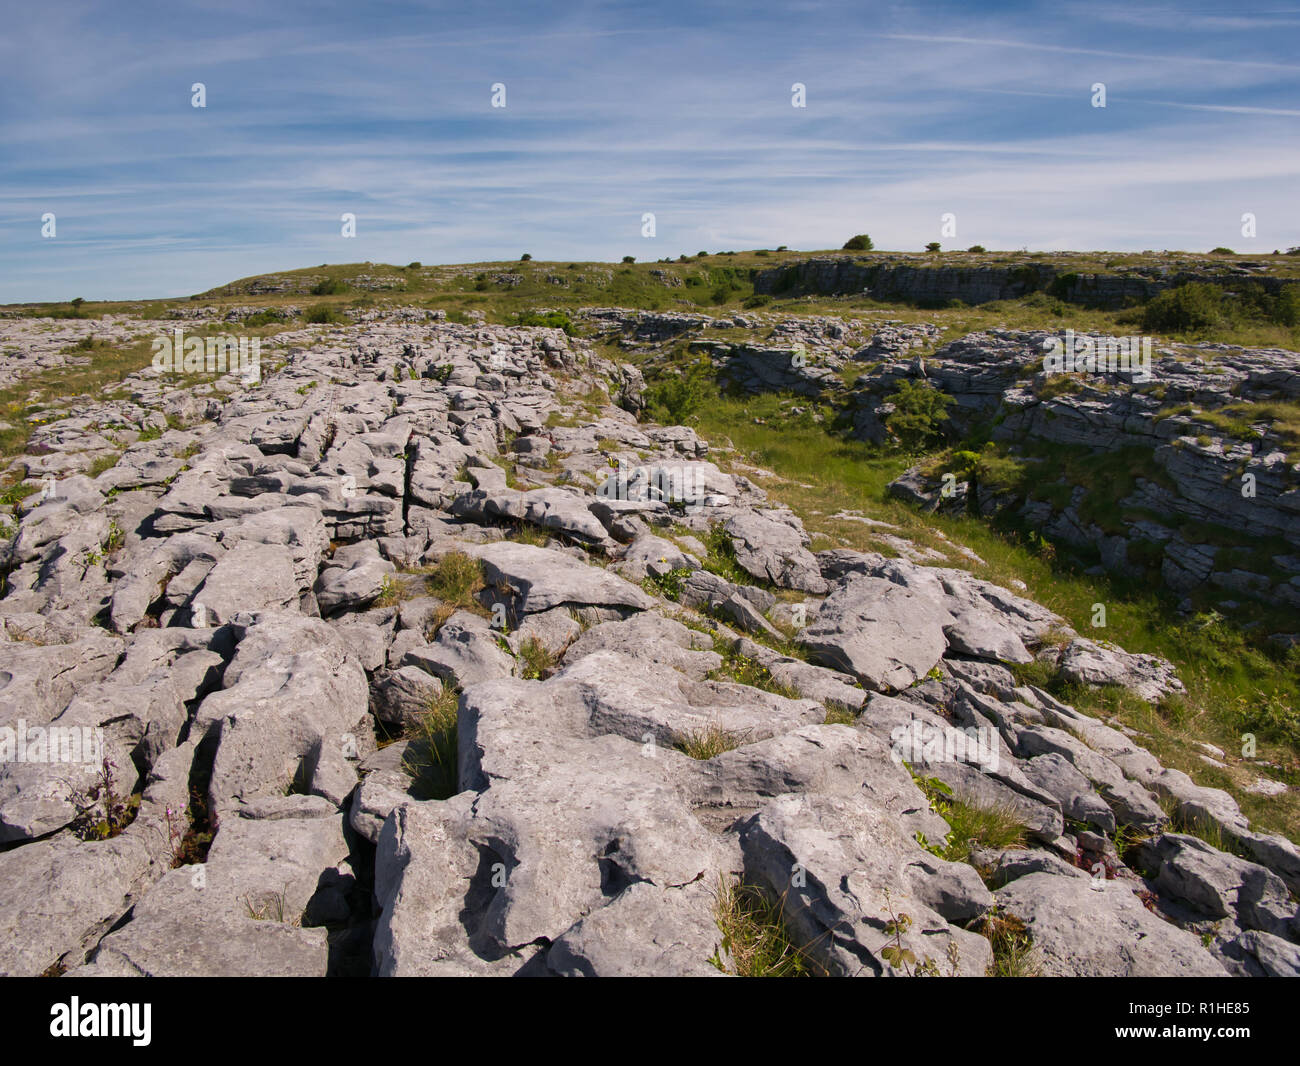 Strange rocky landscape with crevices and grooves at Poulnabrone in Ireland Stock Photo